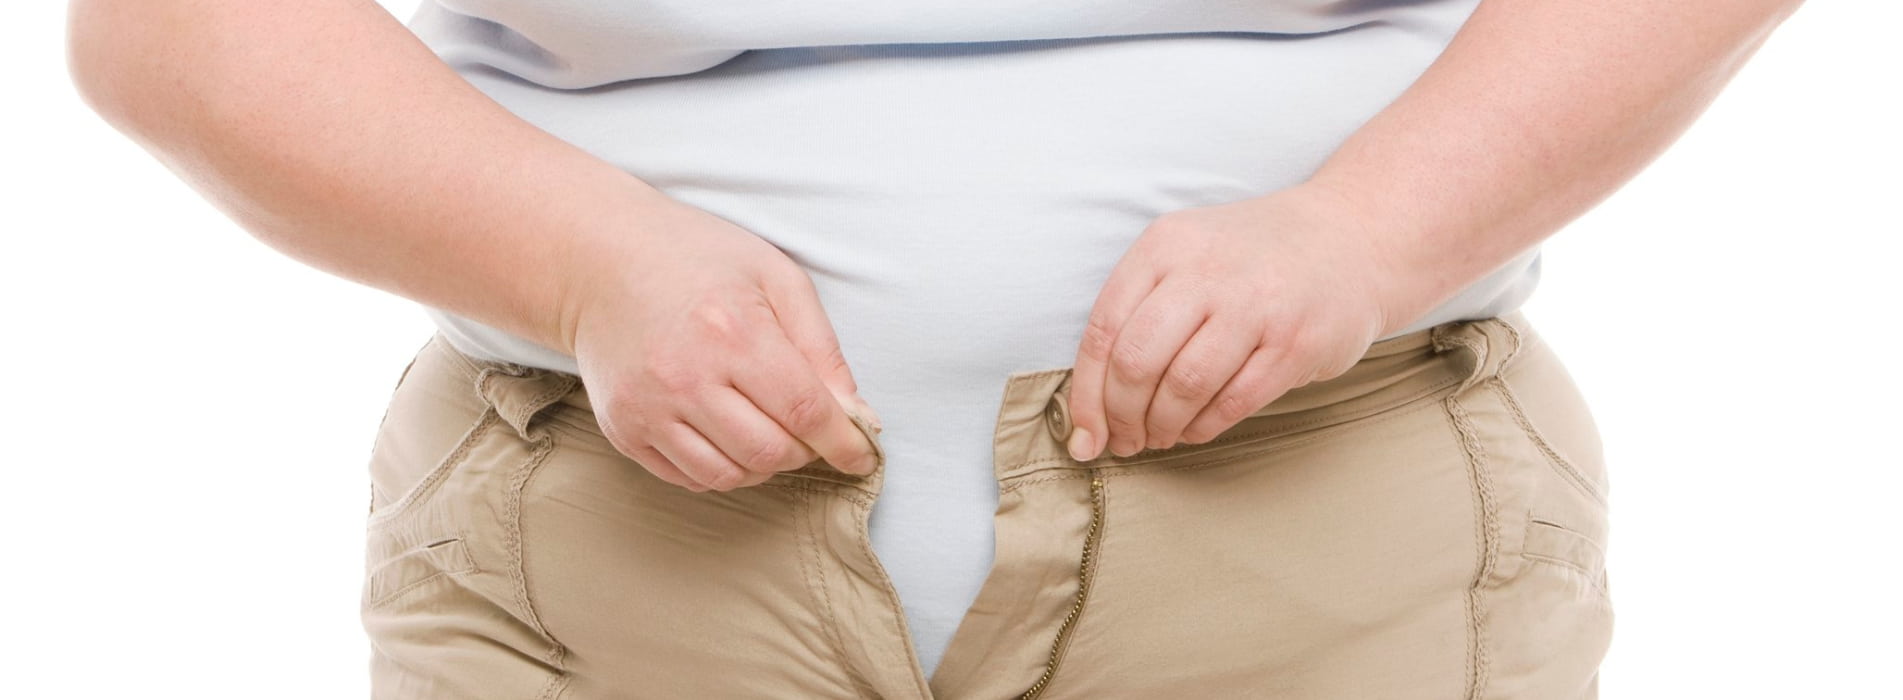 The difference between overweight and obesity